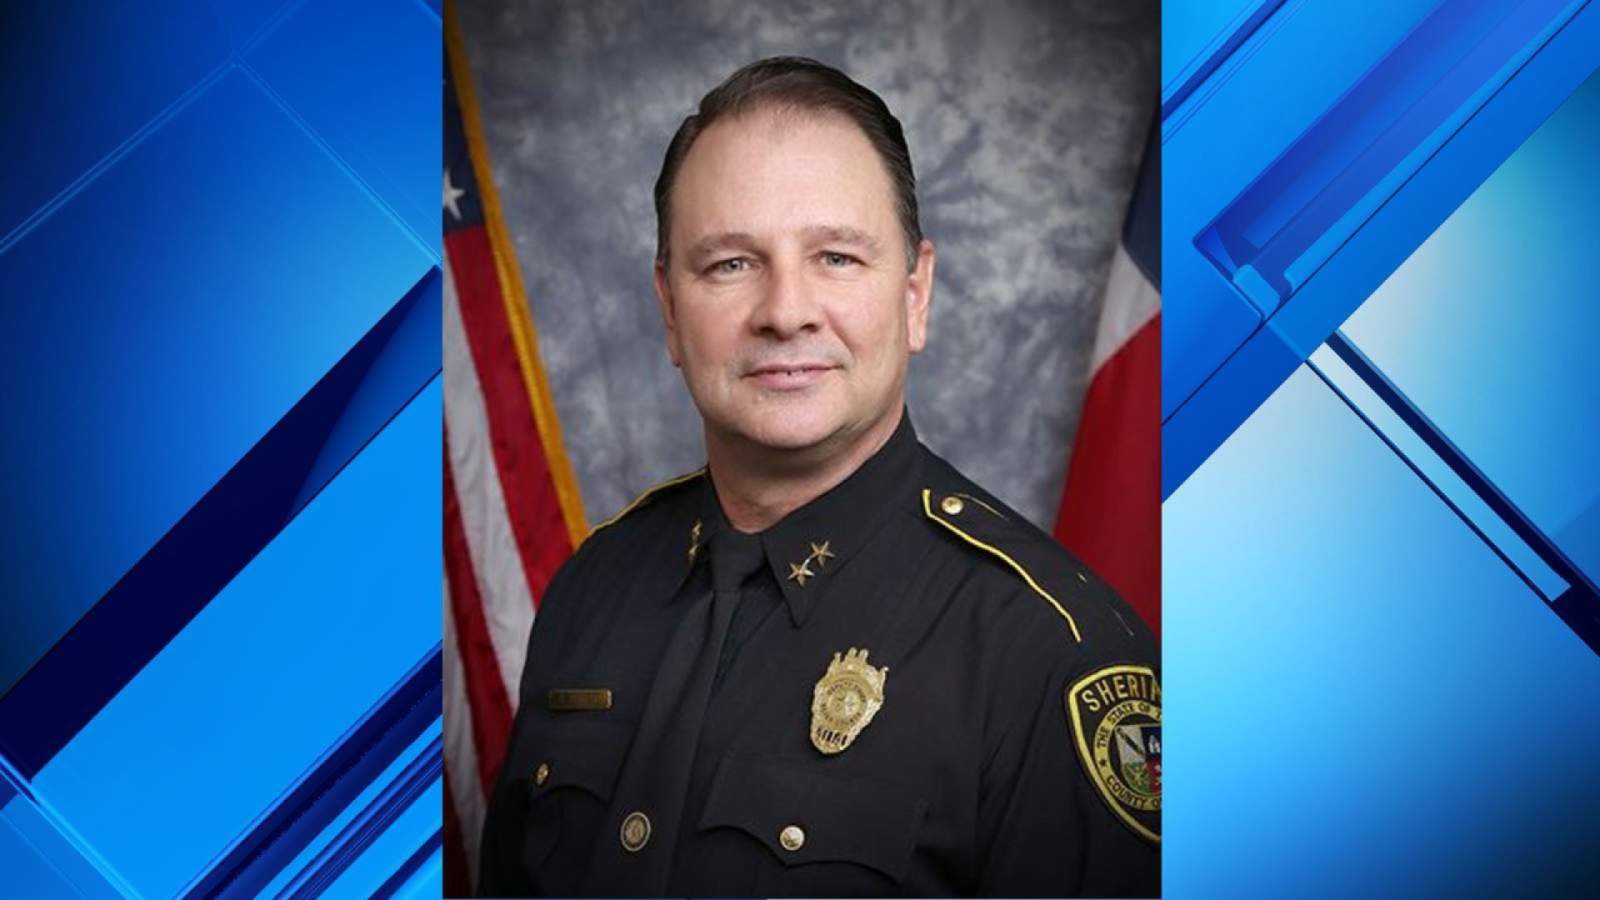 Bexar County Sheriff cuts ties with head of law enforcement division